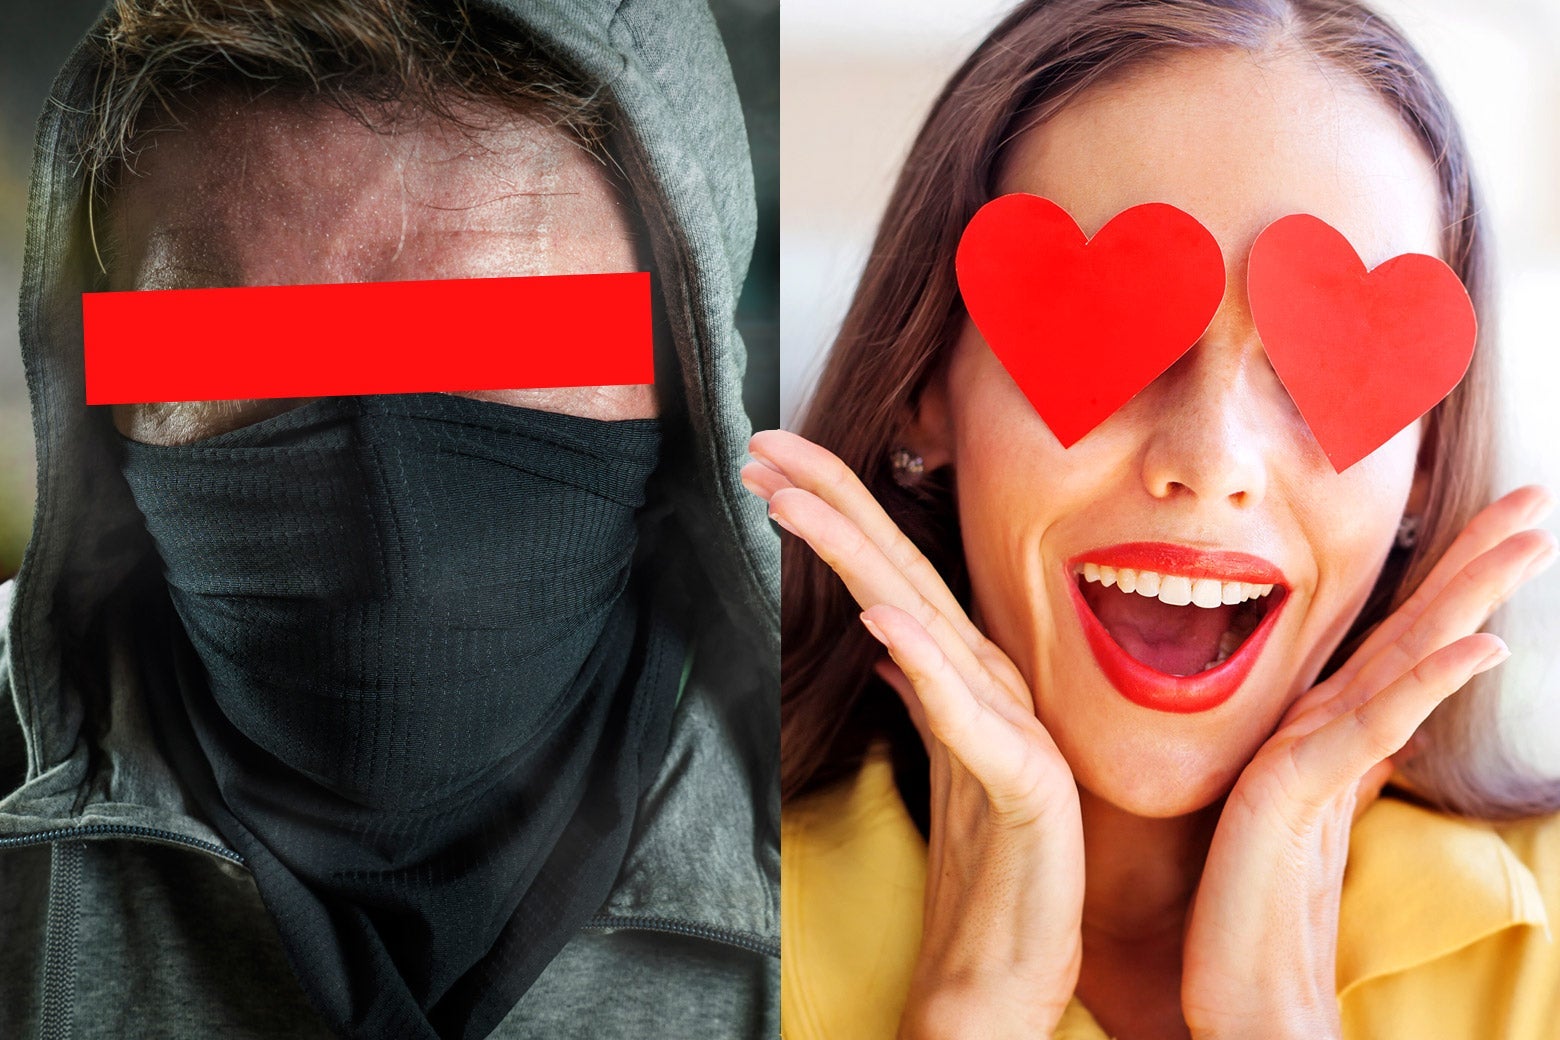 A masked and hooded antifa member and a woman with hearts over her eyes and her hands on her face.